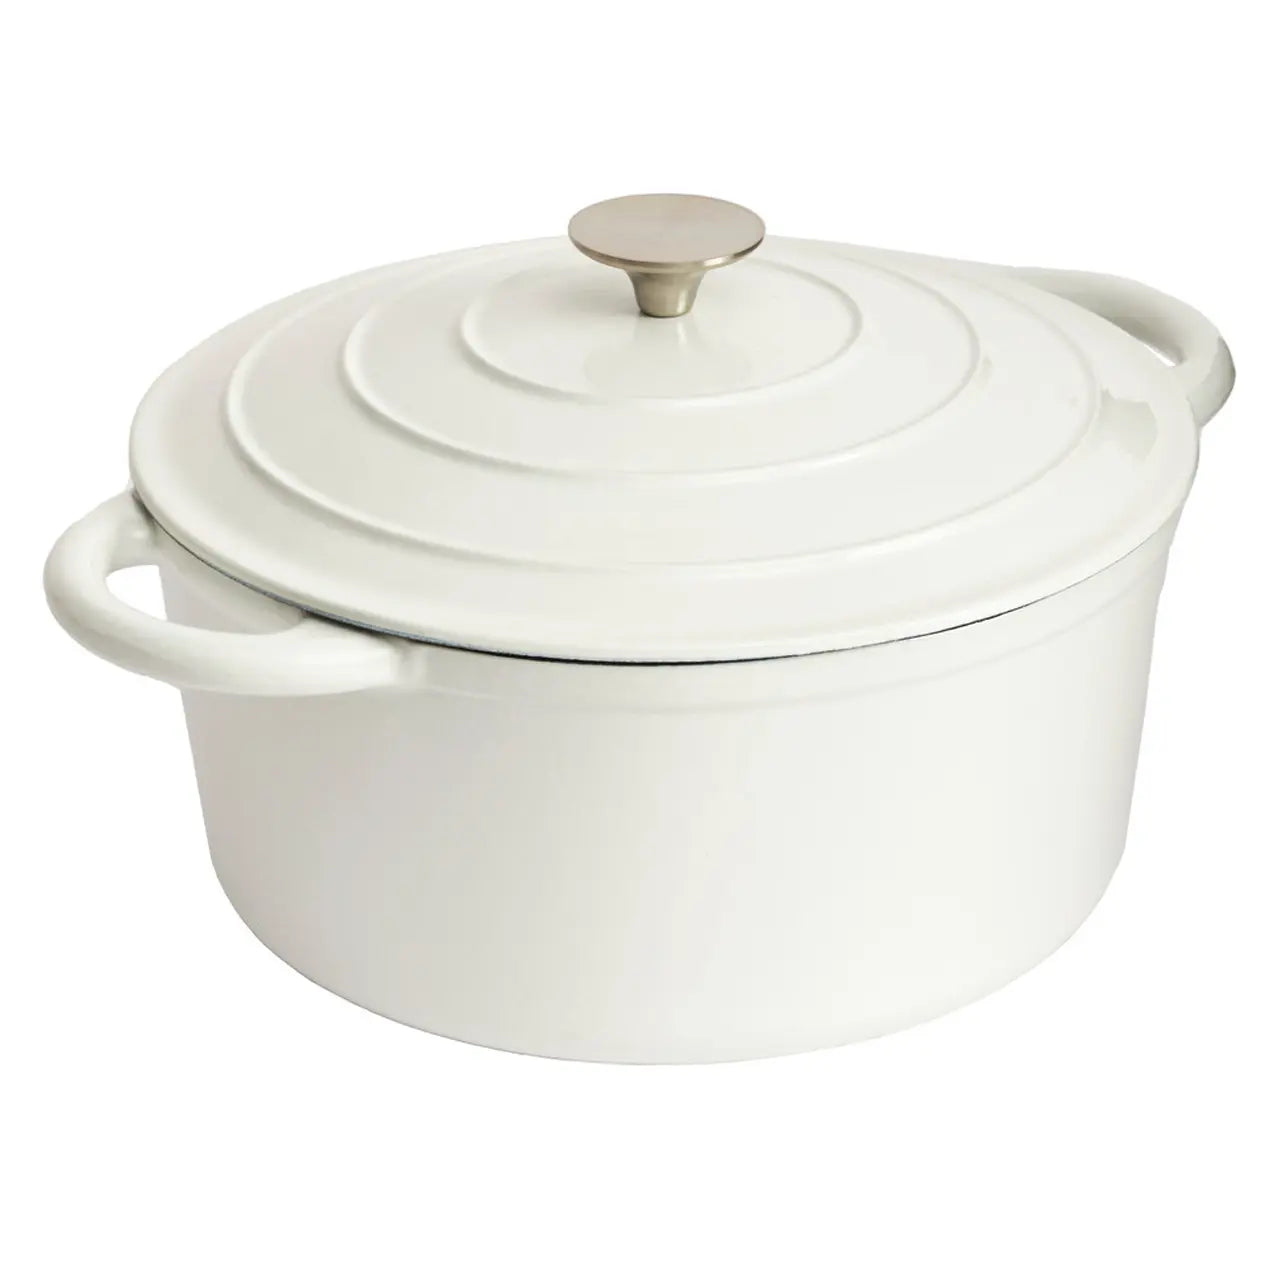 Enameled Cast Iron 11 inch Round Dutch Oven in White